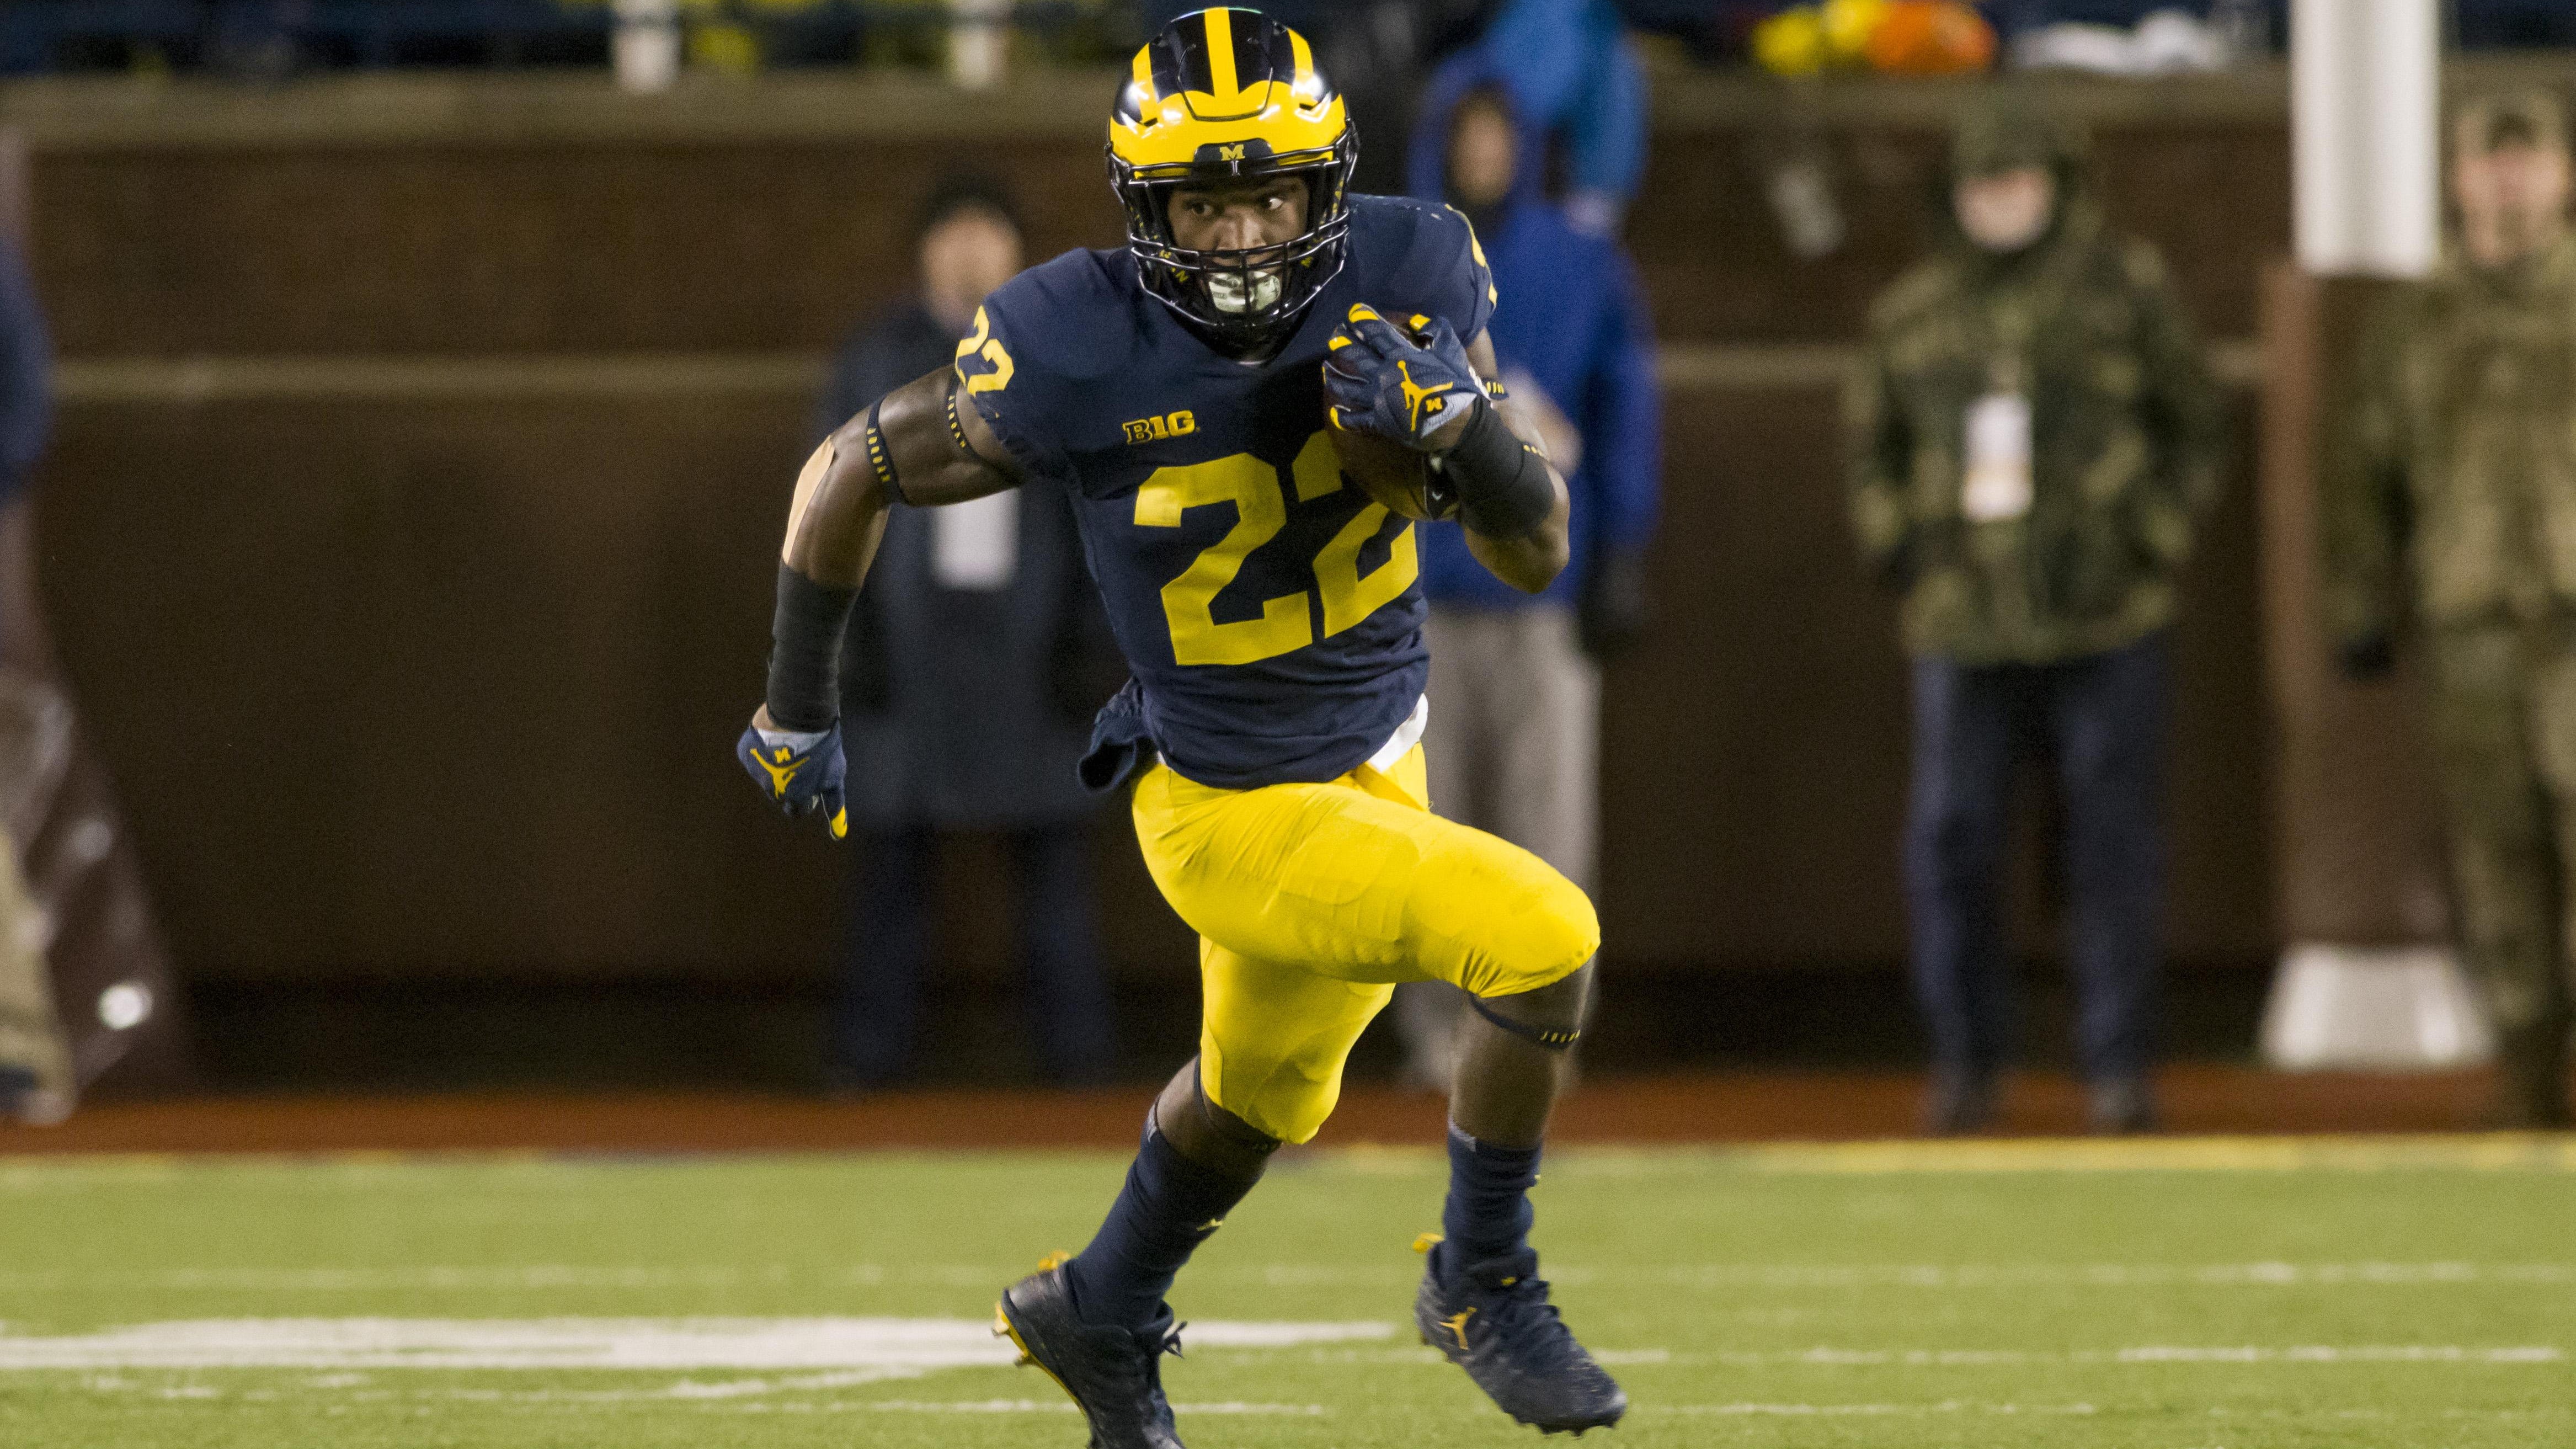 “We’ve competed very well with our defense. We surprised them with the transition that we’ve made,” Michigan running back Karan Higdon says.